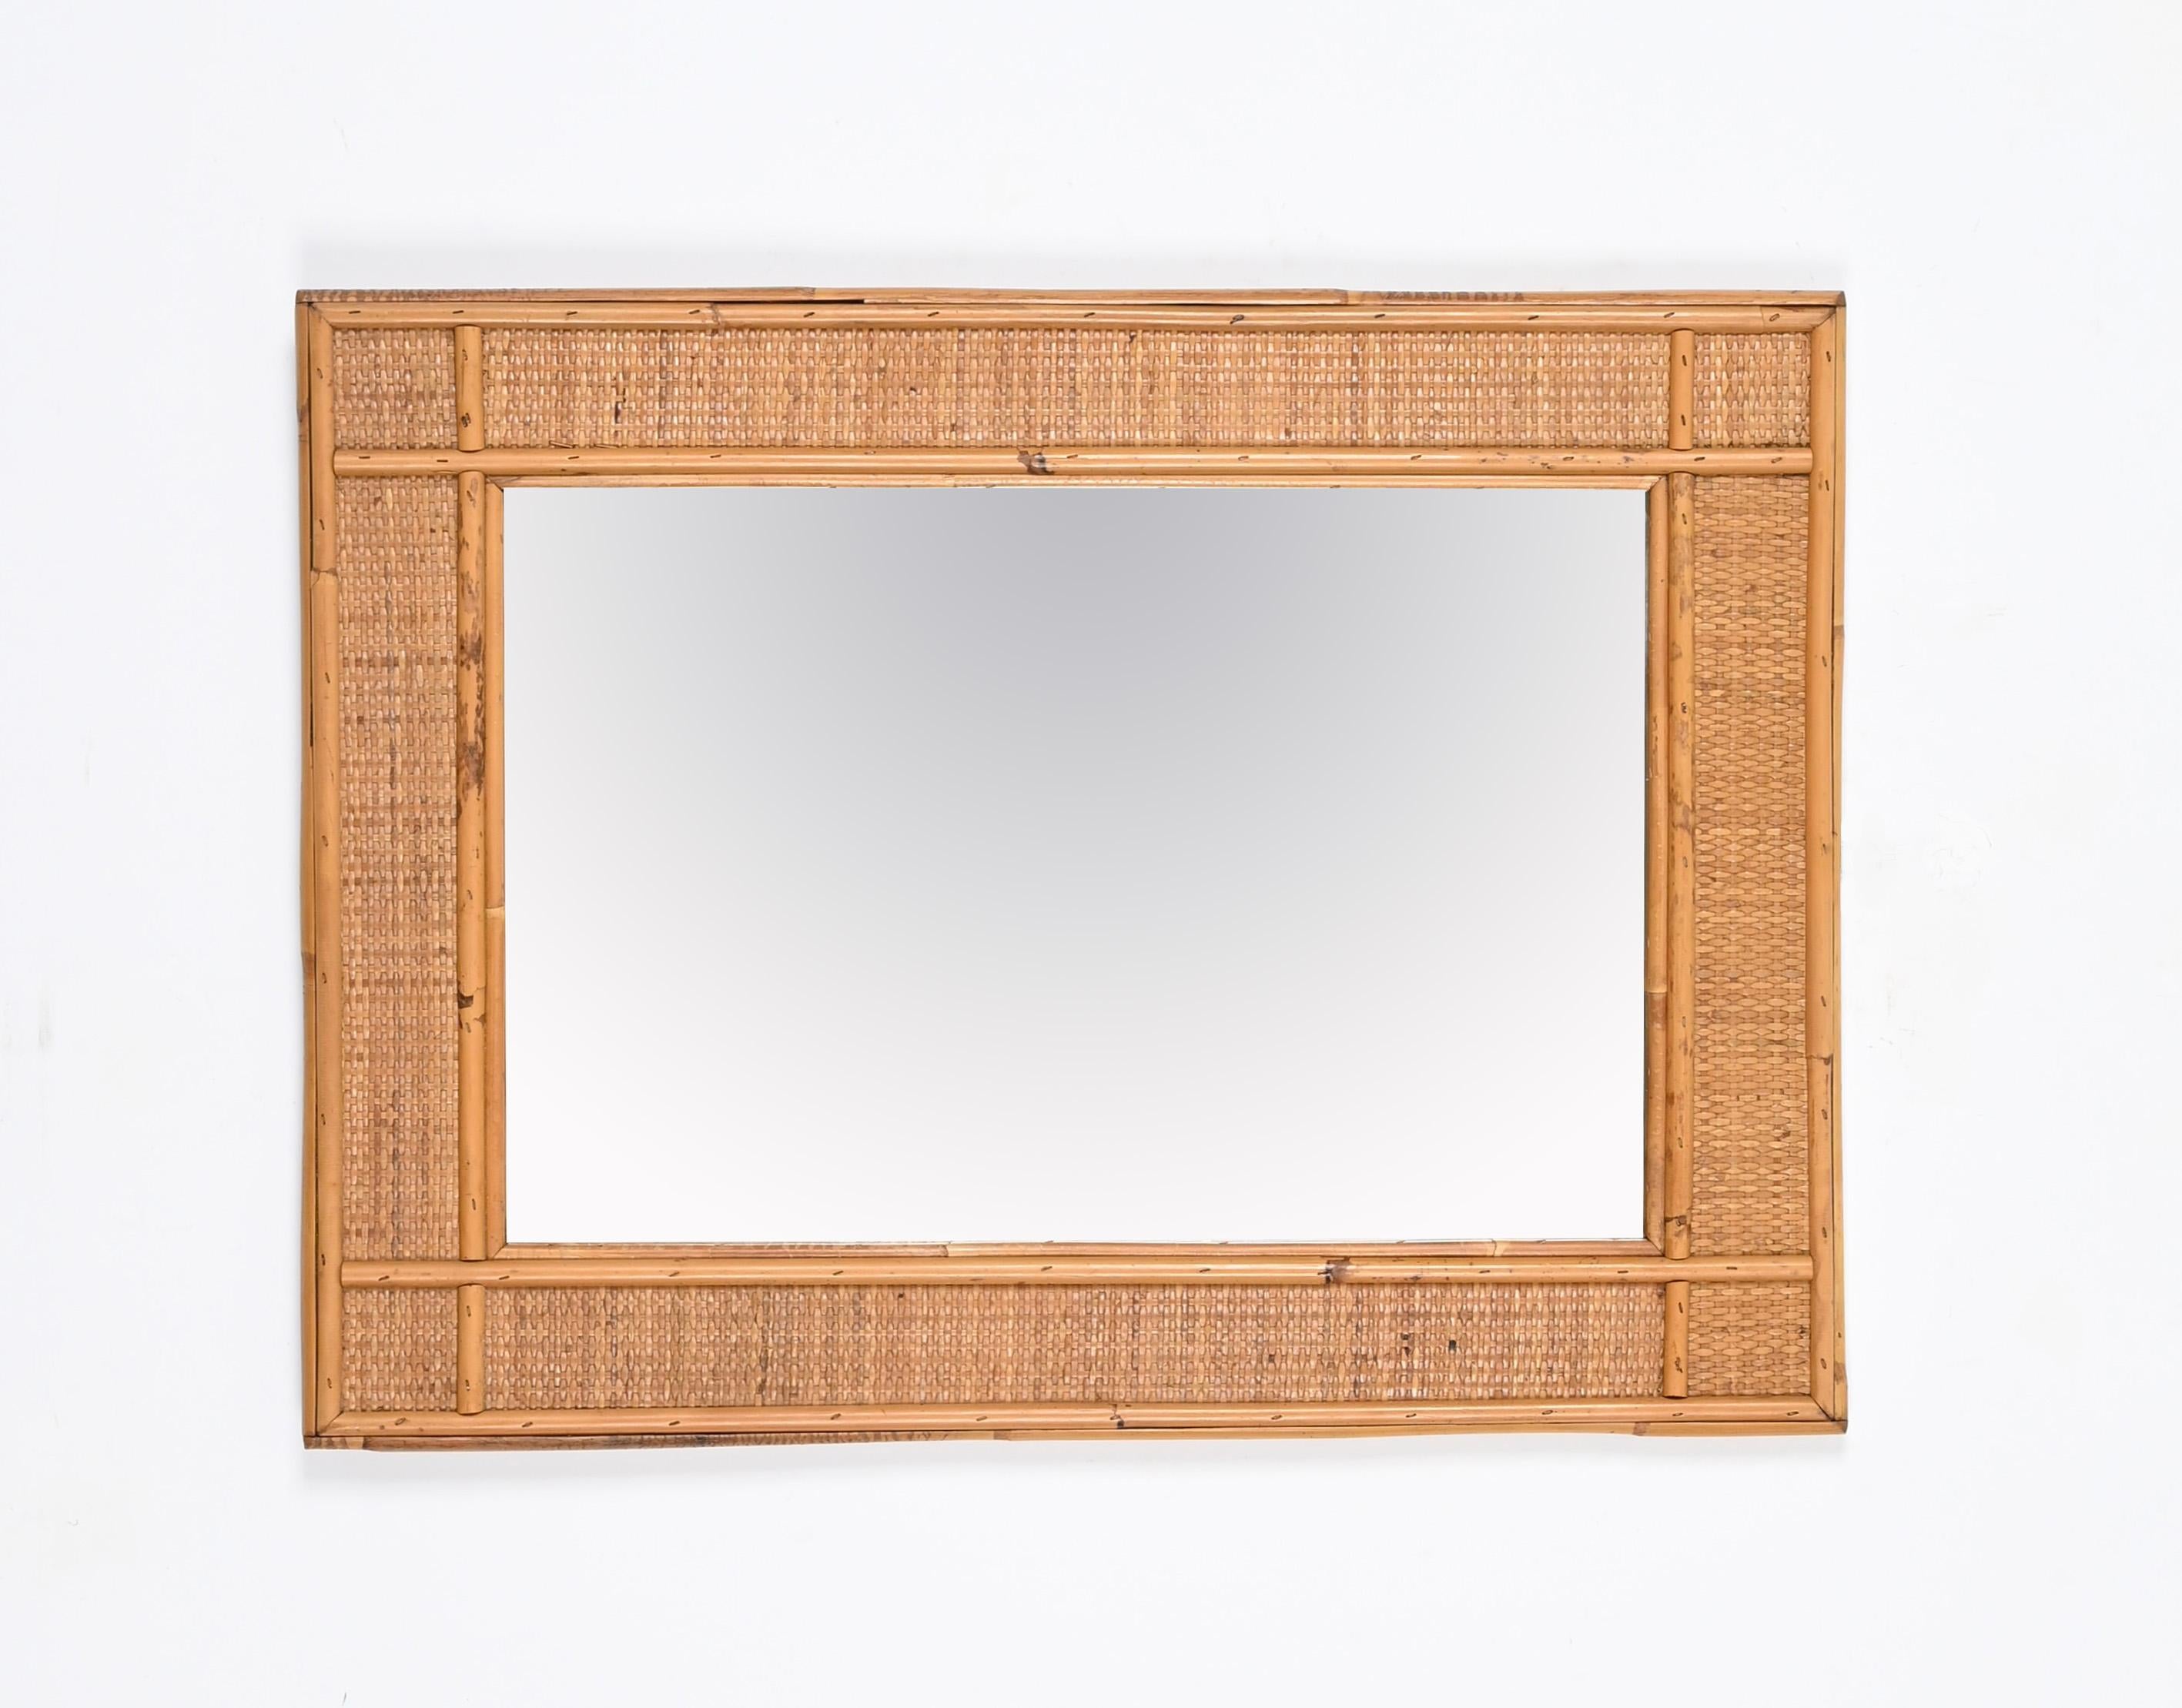 Midcentury Rectangular  Bamboo and Woven Rattan Wicker Mirror, Italy 1970s For Sale 8